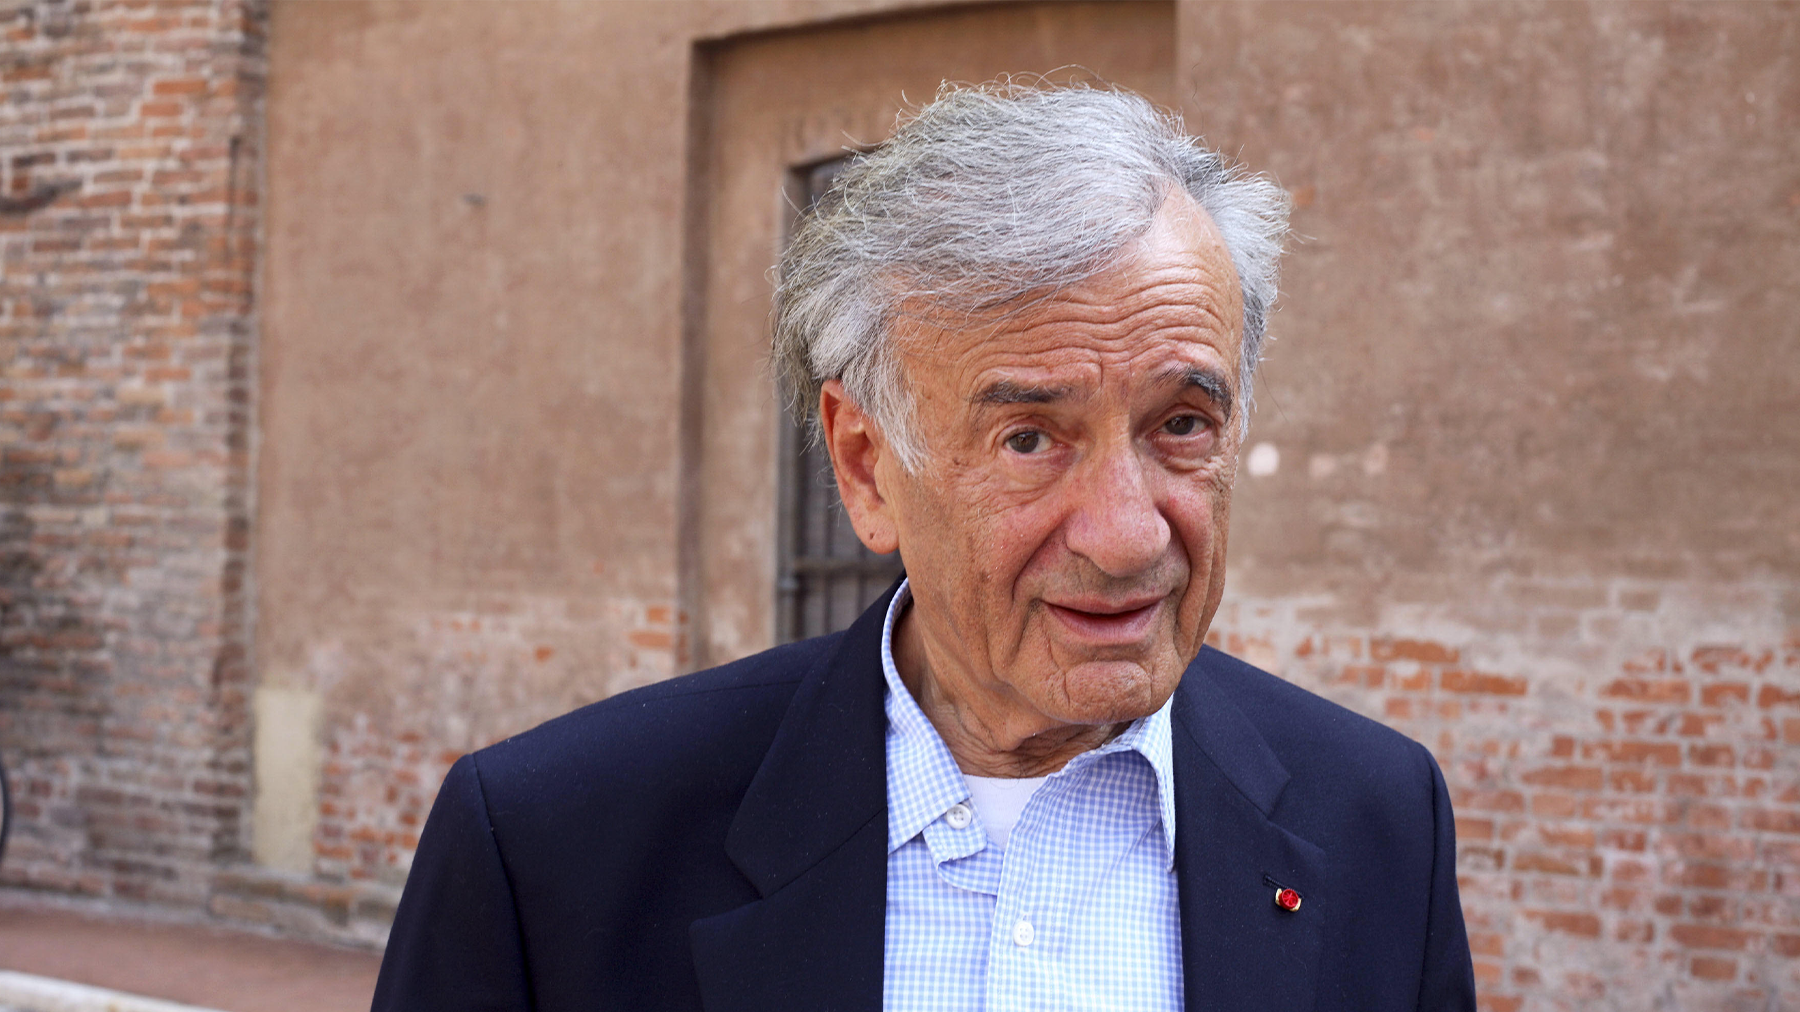 The author and Nobel Peace Prize winner Elie Wiesel